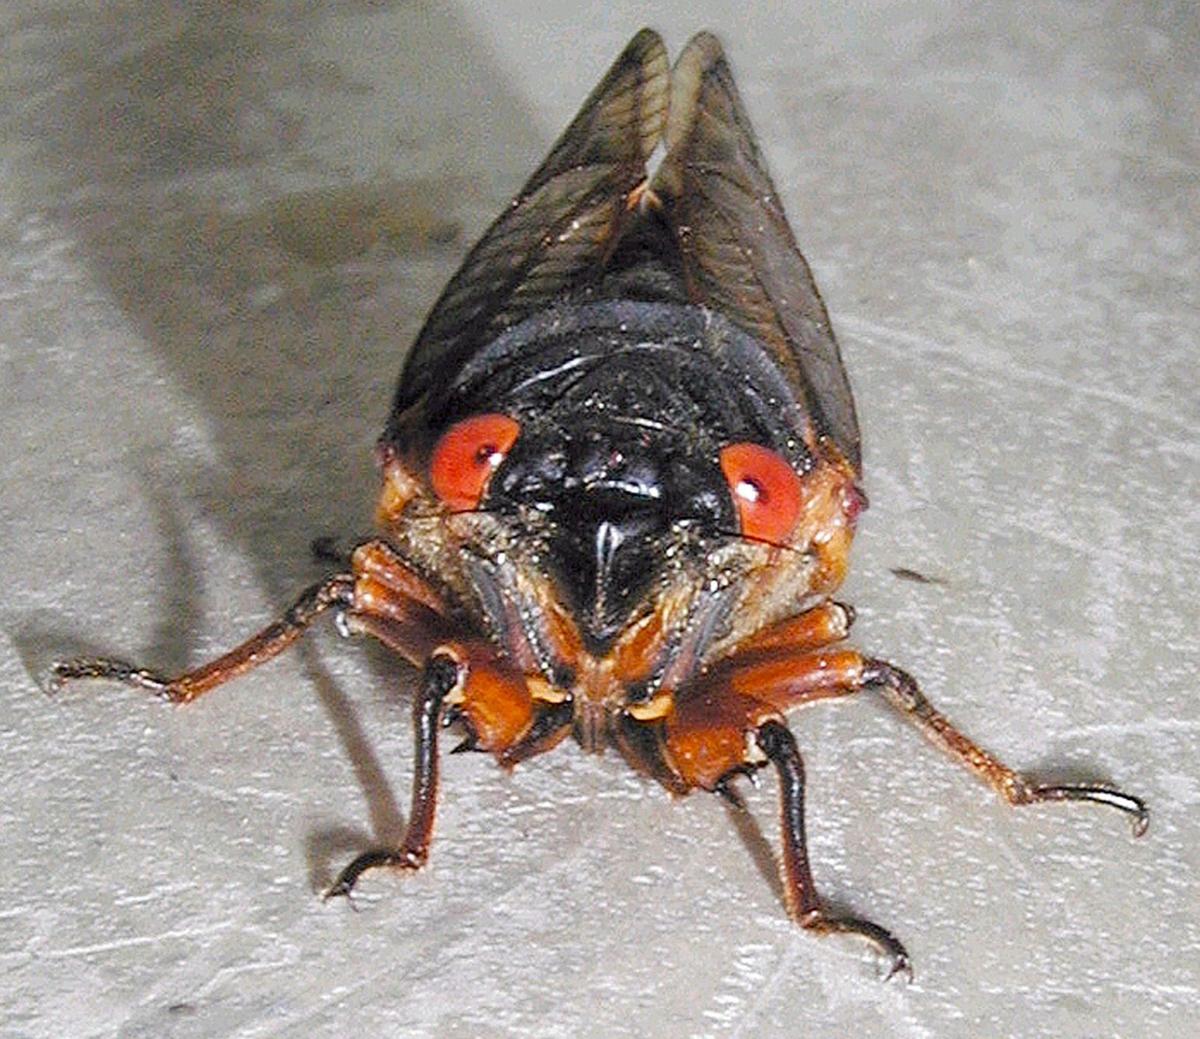 What's the buzz? Cicadas may emerge early in Central Illinois